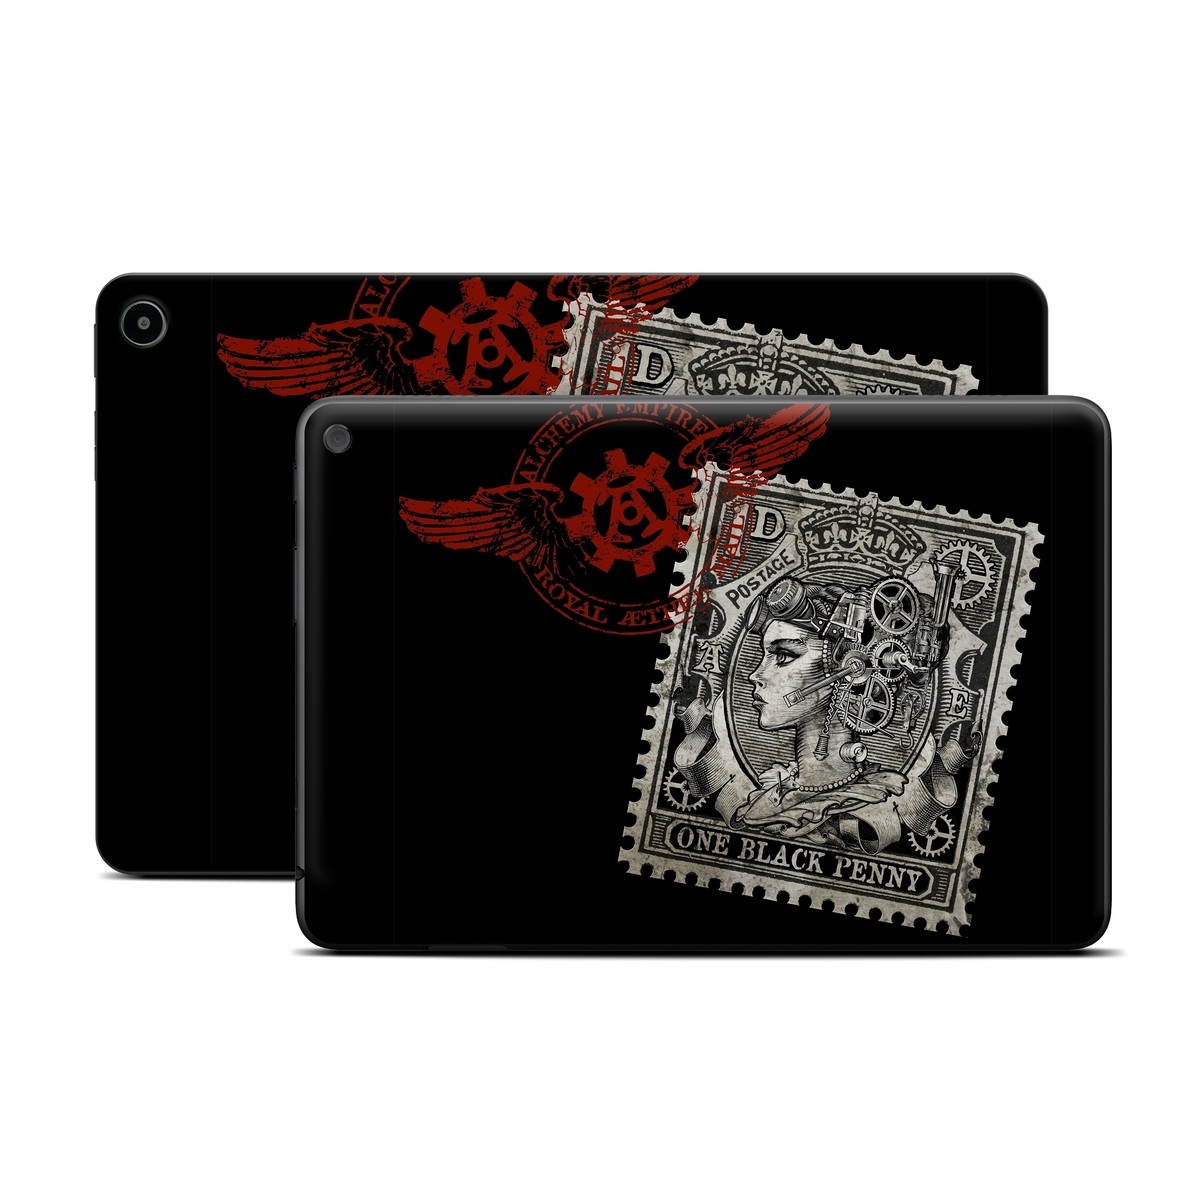 Amazon Fire Tablet Series Skin Skin design of Font, Postage stamp, Illustration, Drawing, Art, with black, gray, red colors